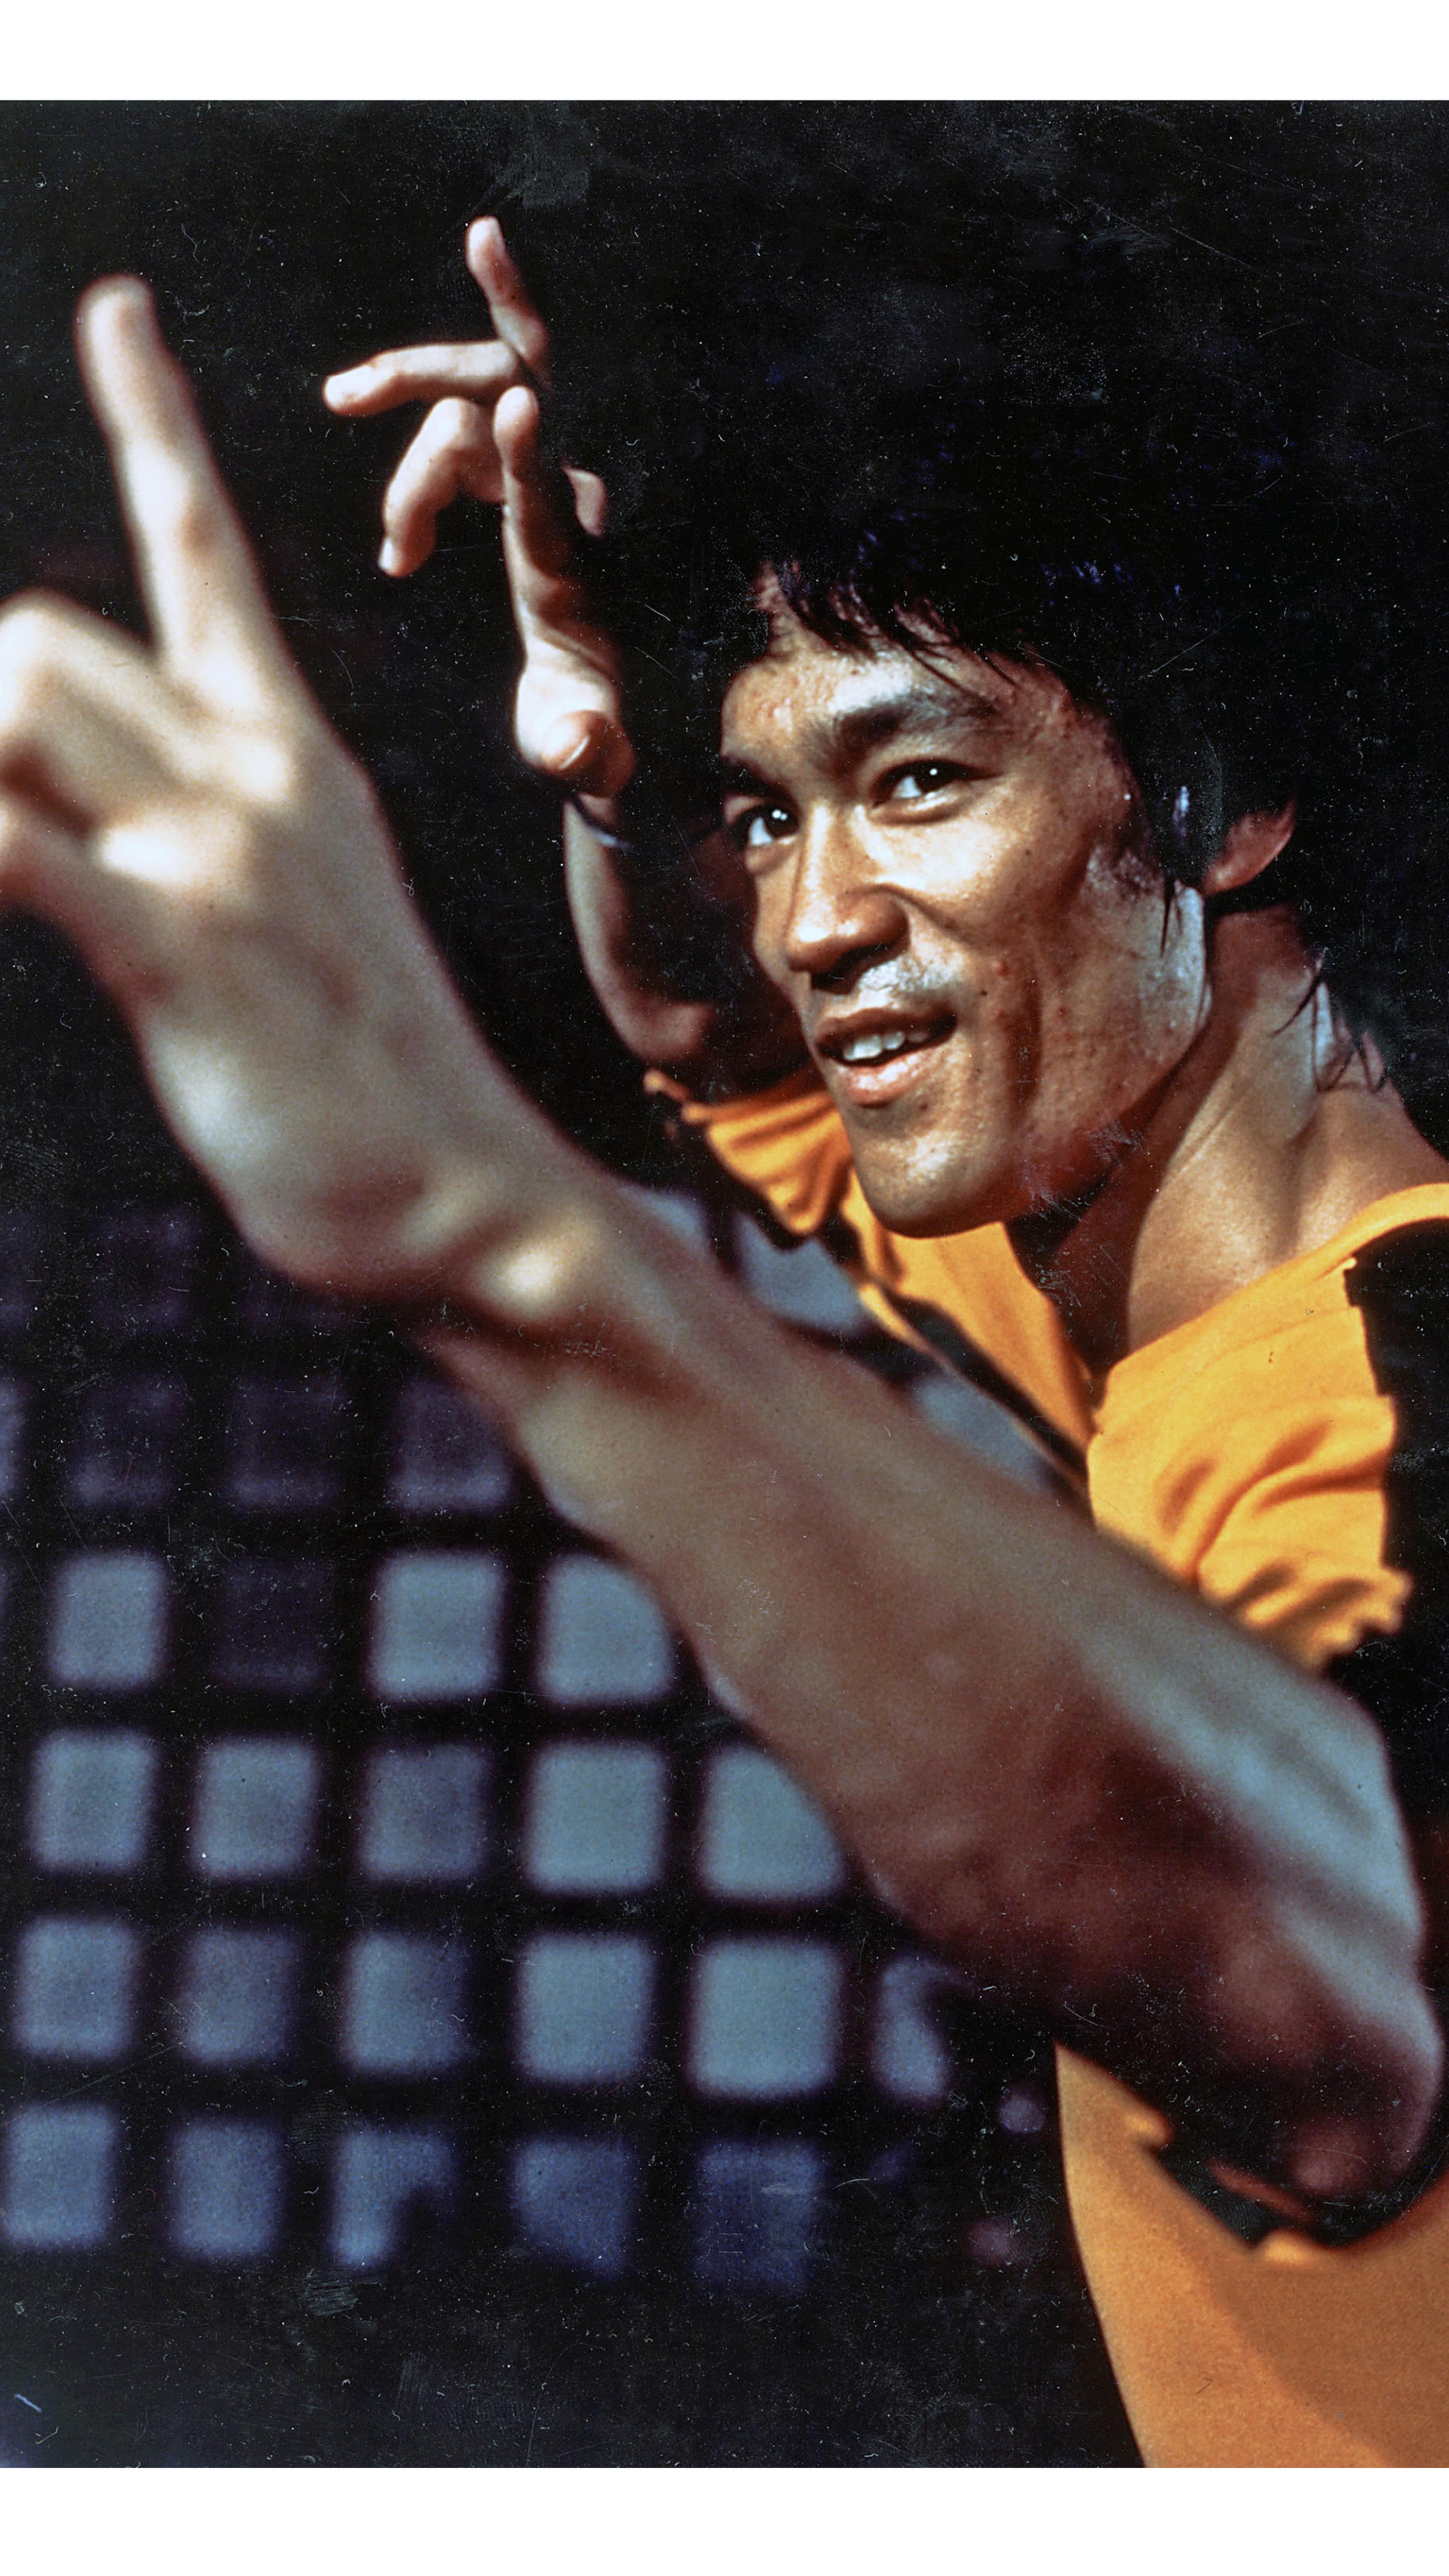 Preview image for the show titled "2024 Bruce Lee Keepsake 50th Anniversary Box Edition" at April 26, 2024